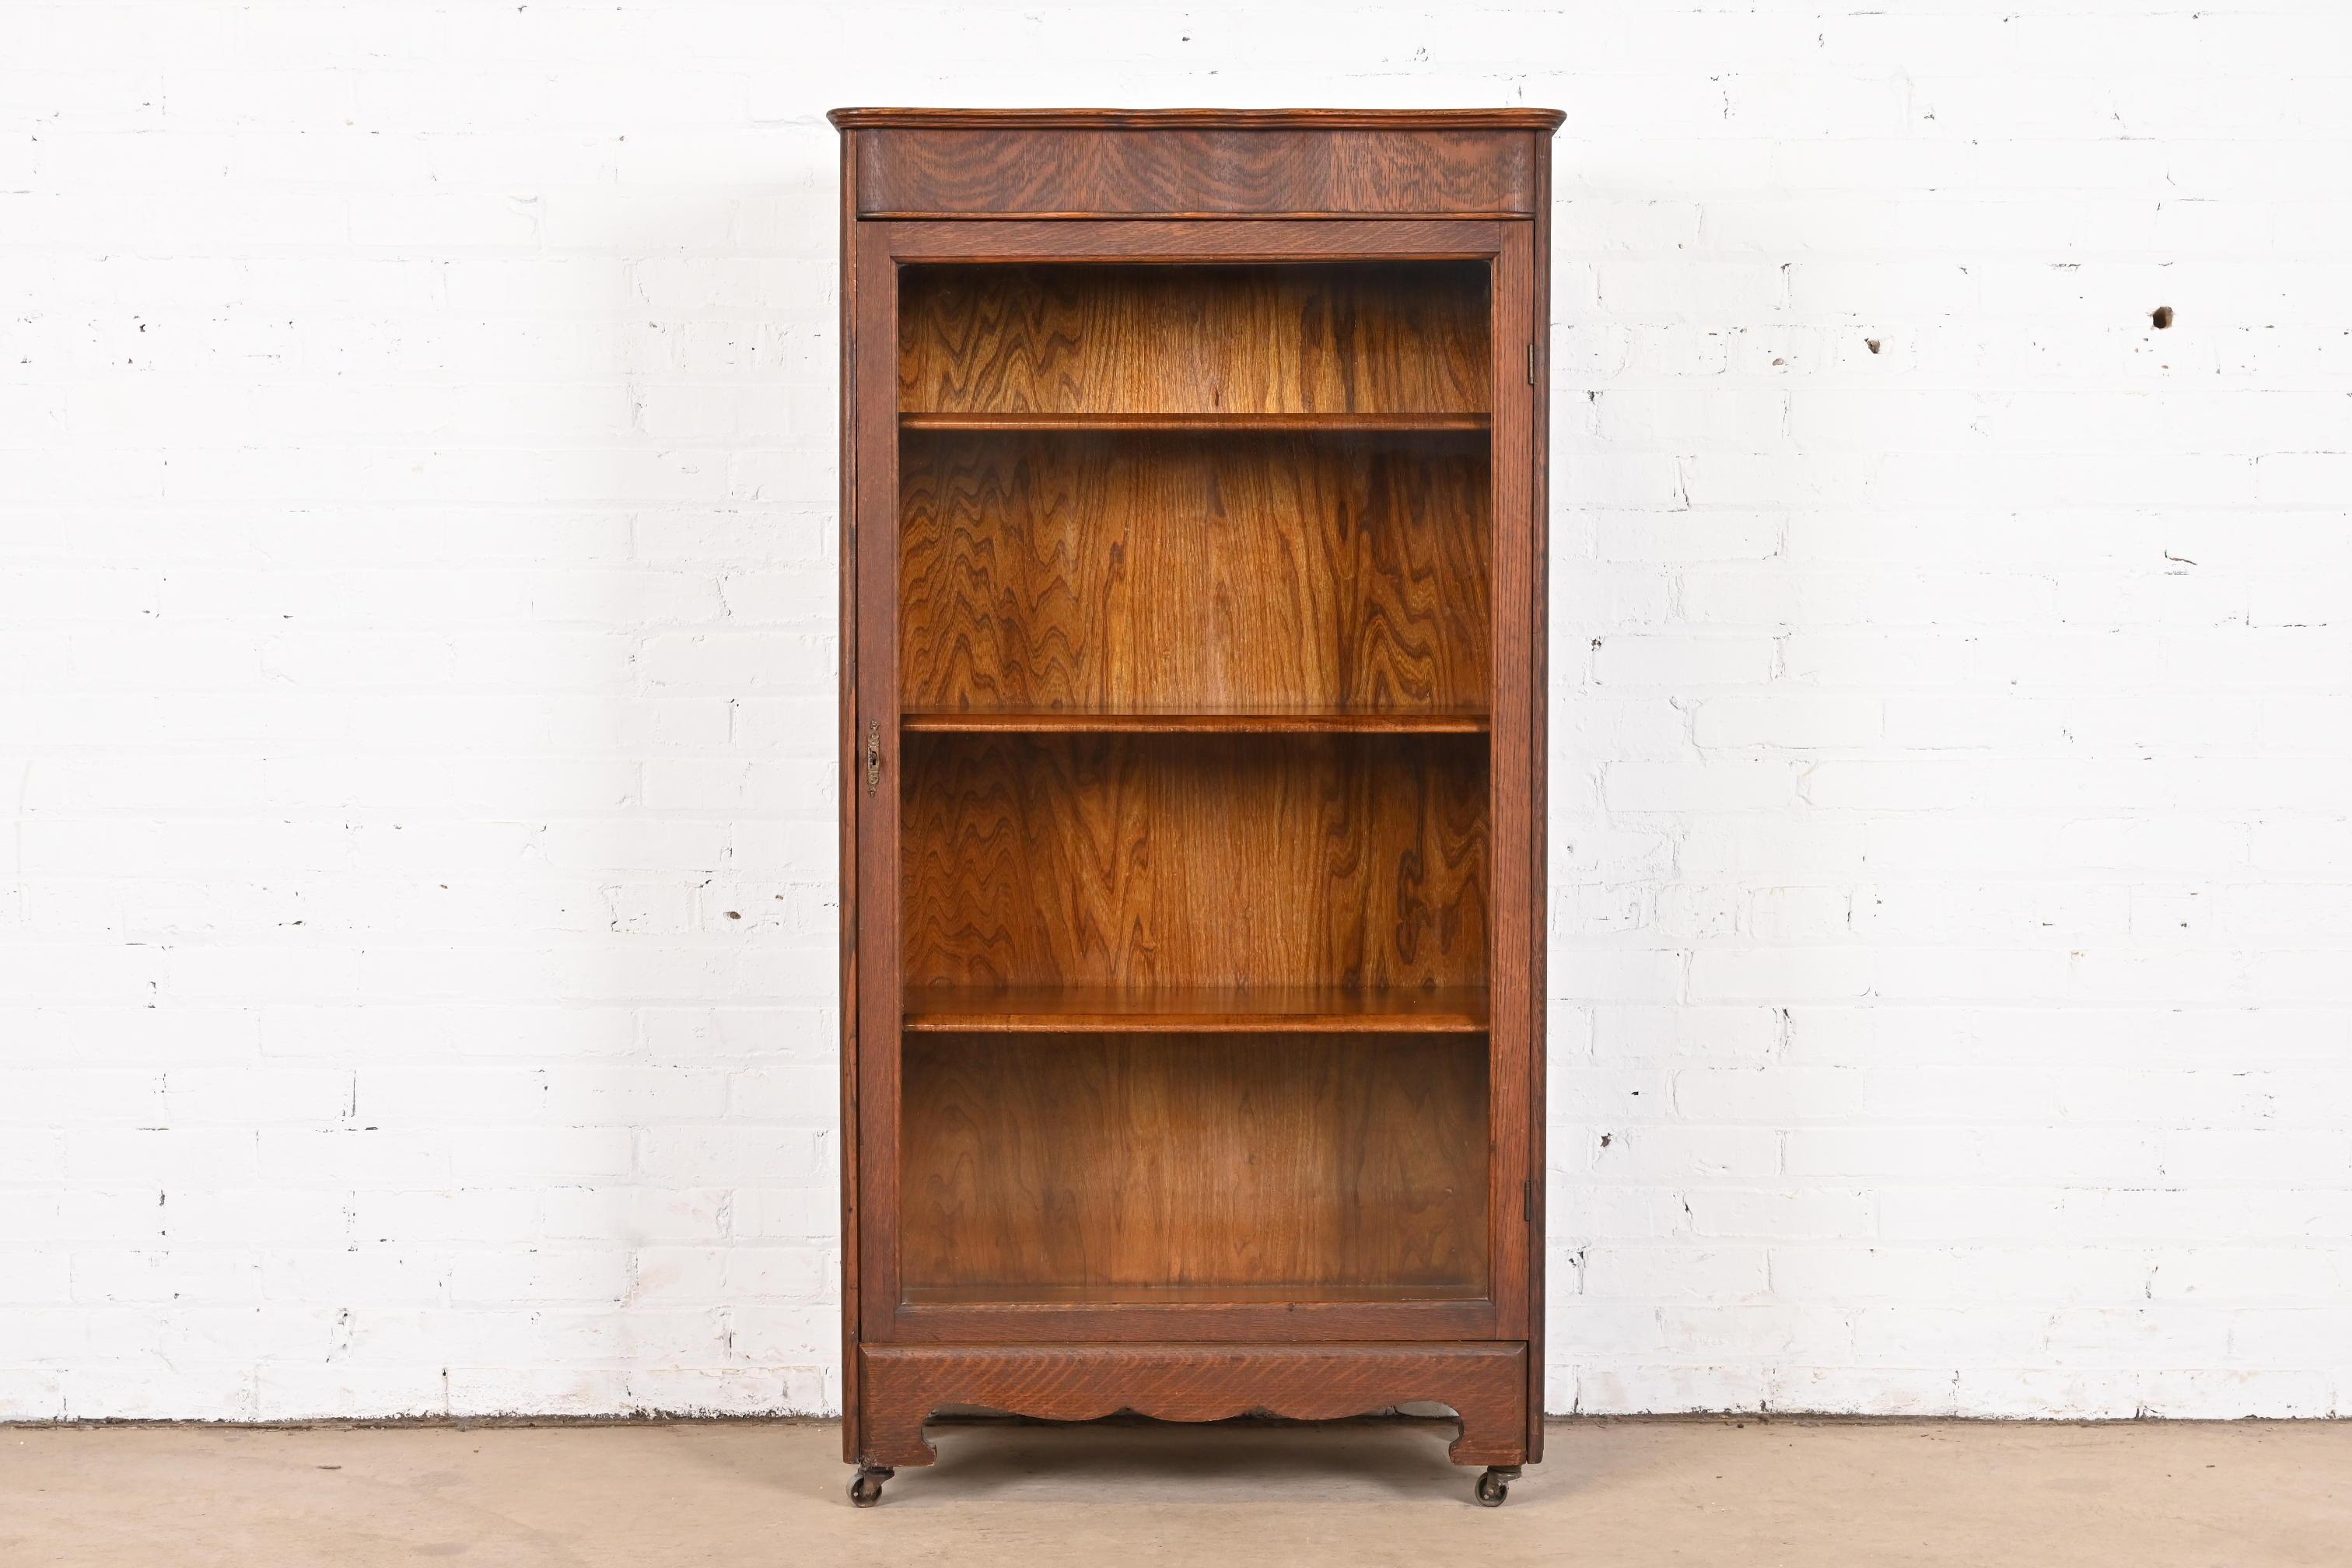 A beautiful antique Arts & Crafts or Late Victorian glass front single door bookcase cabinet

In the manner of Stickley Brothers

USA, Circa 1900

Carved quarter sawn oak, with glass front door. Cabinet locks, and key is included. Shelves are